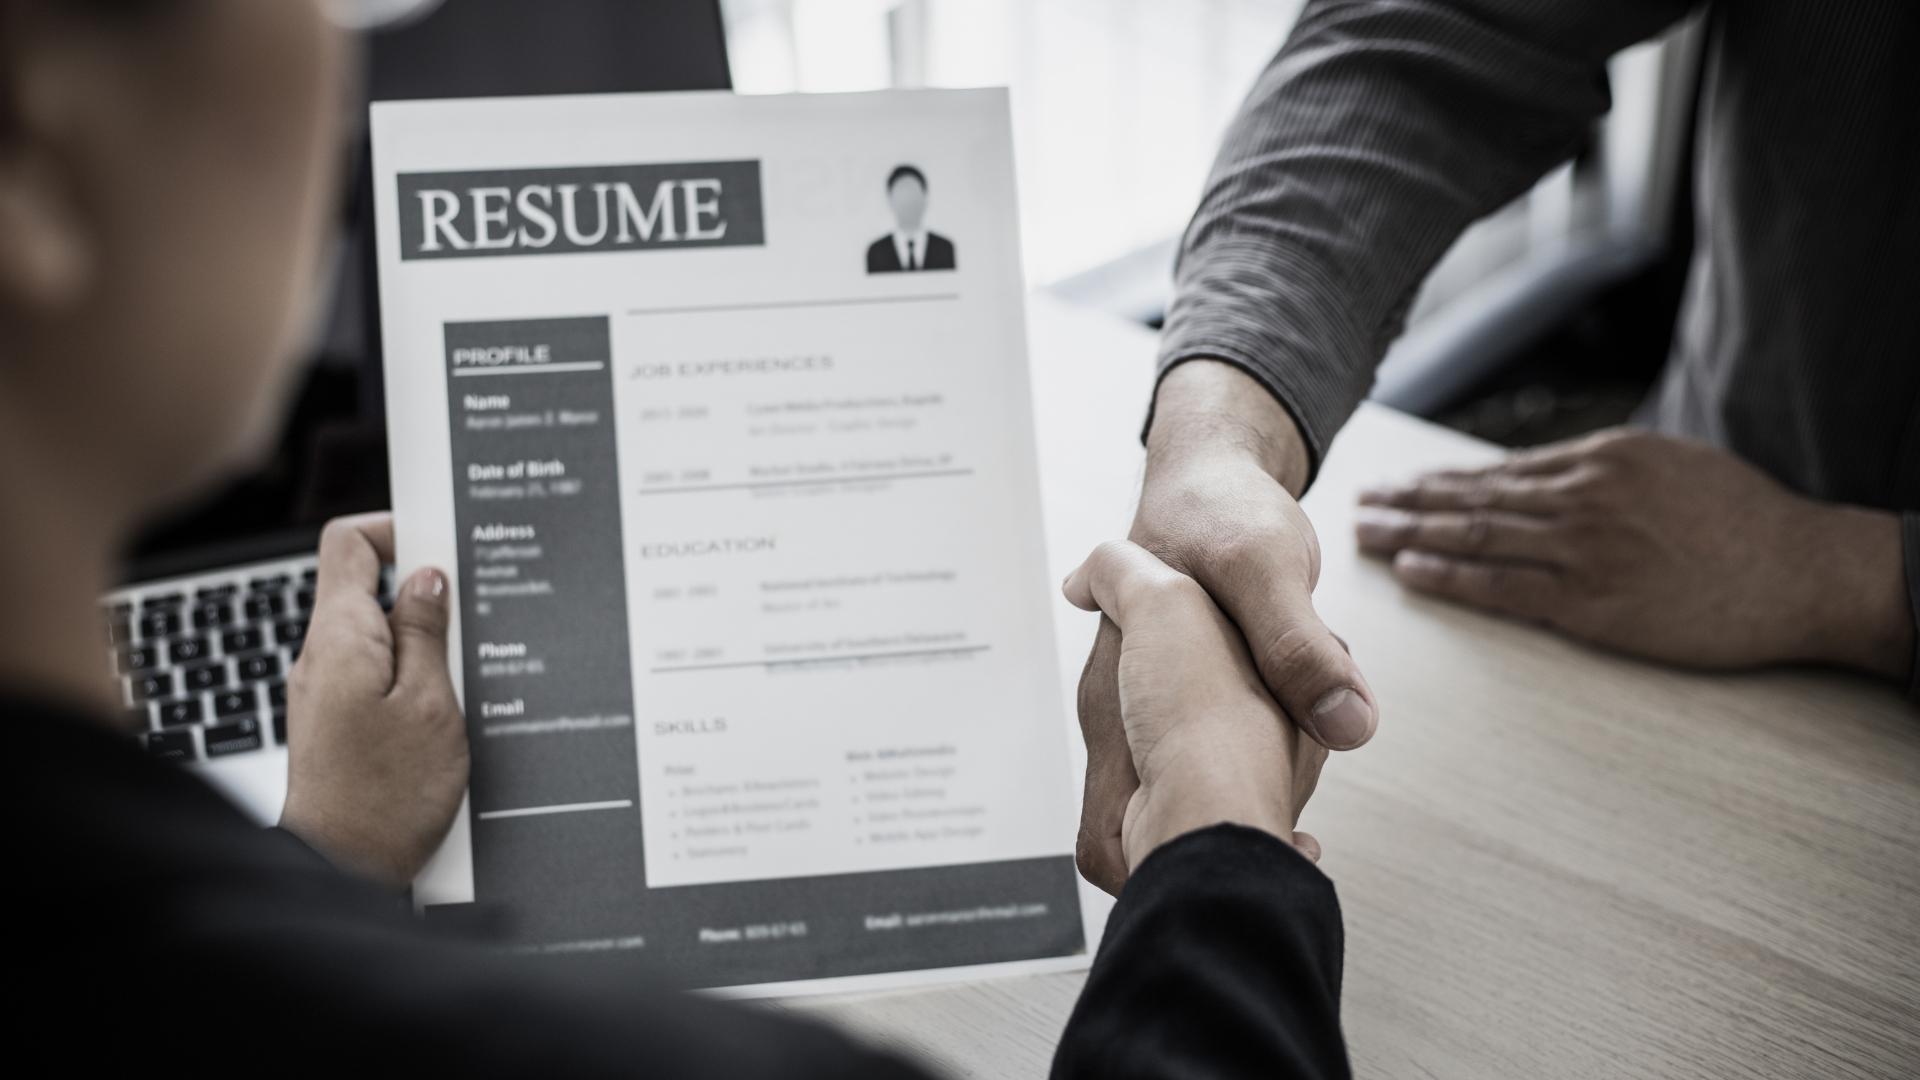 chef's resume and interview process